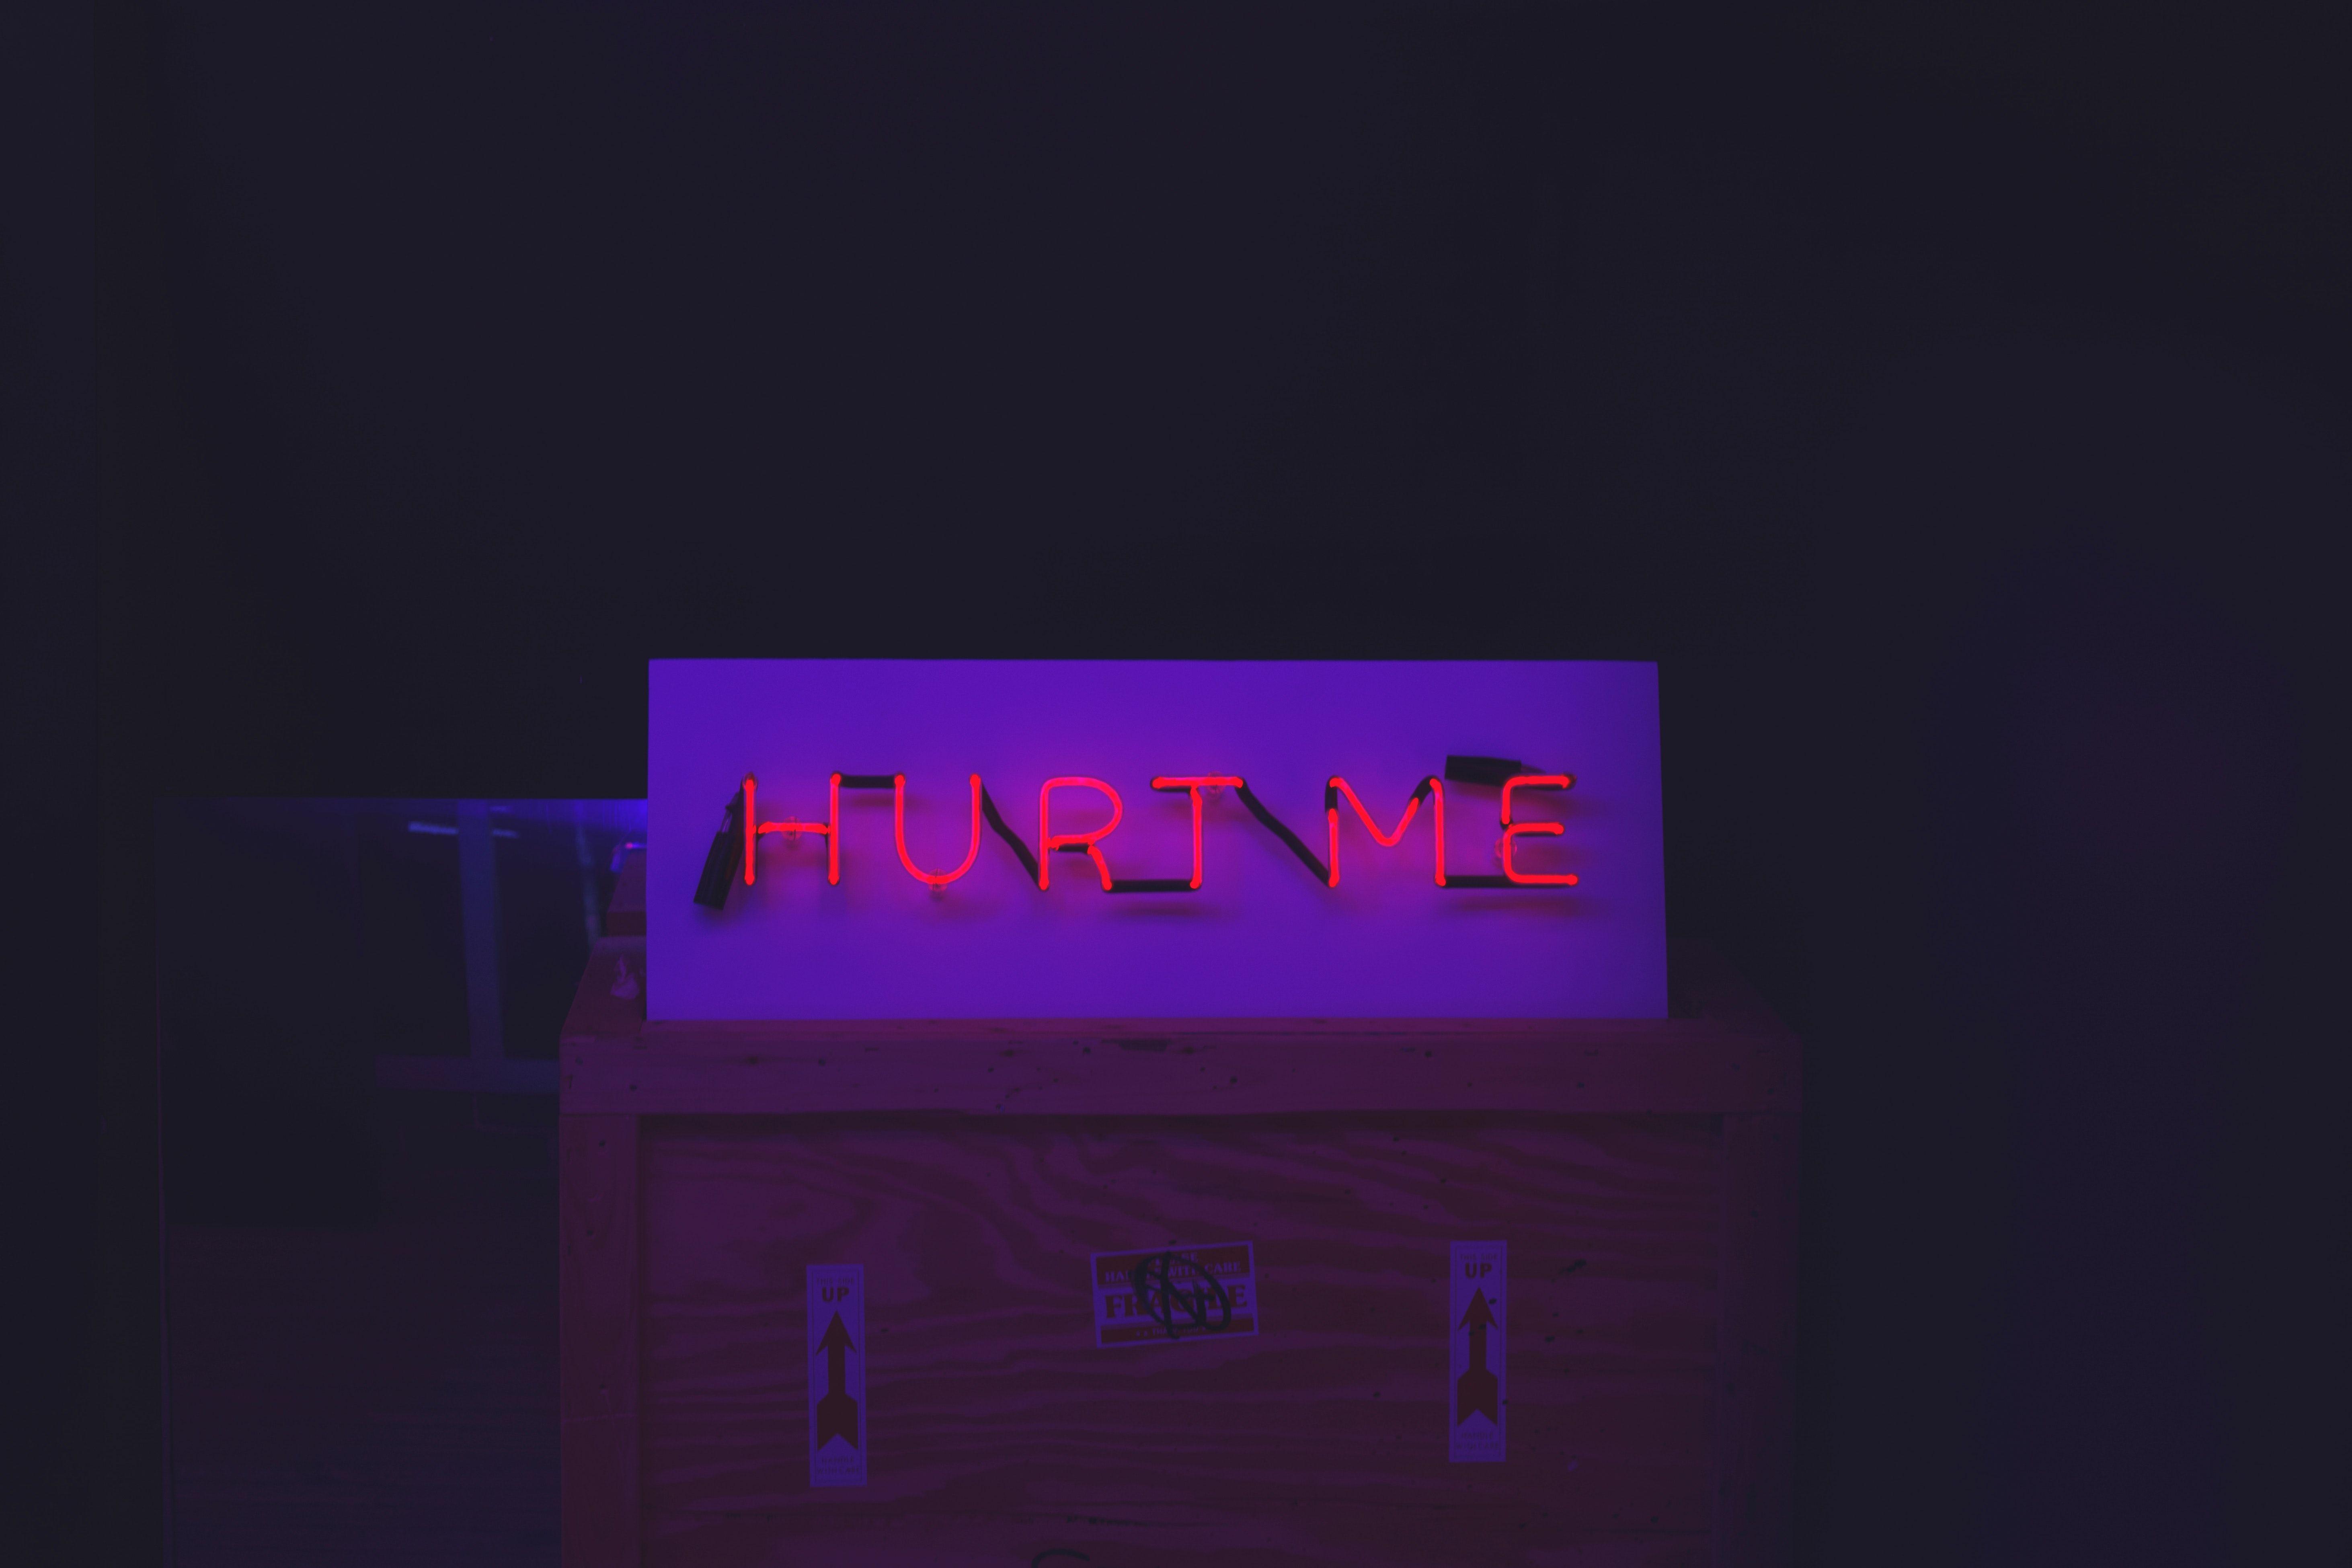 Aesthetic Grunge Neon Signs Wallpapers Top Free Aesthetic Grunge Neon Signs Backgrounds Wallpaperaccess - roblox neon sign wallpaper